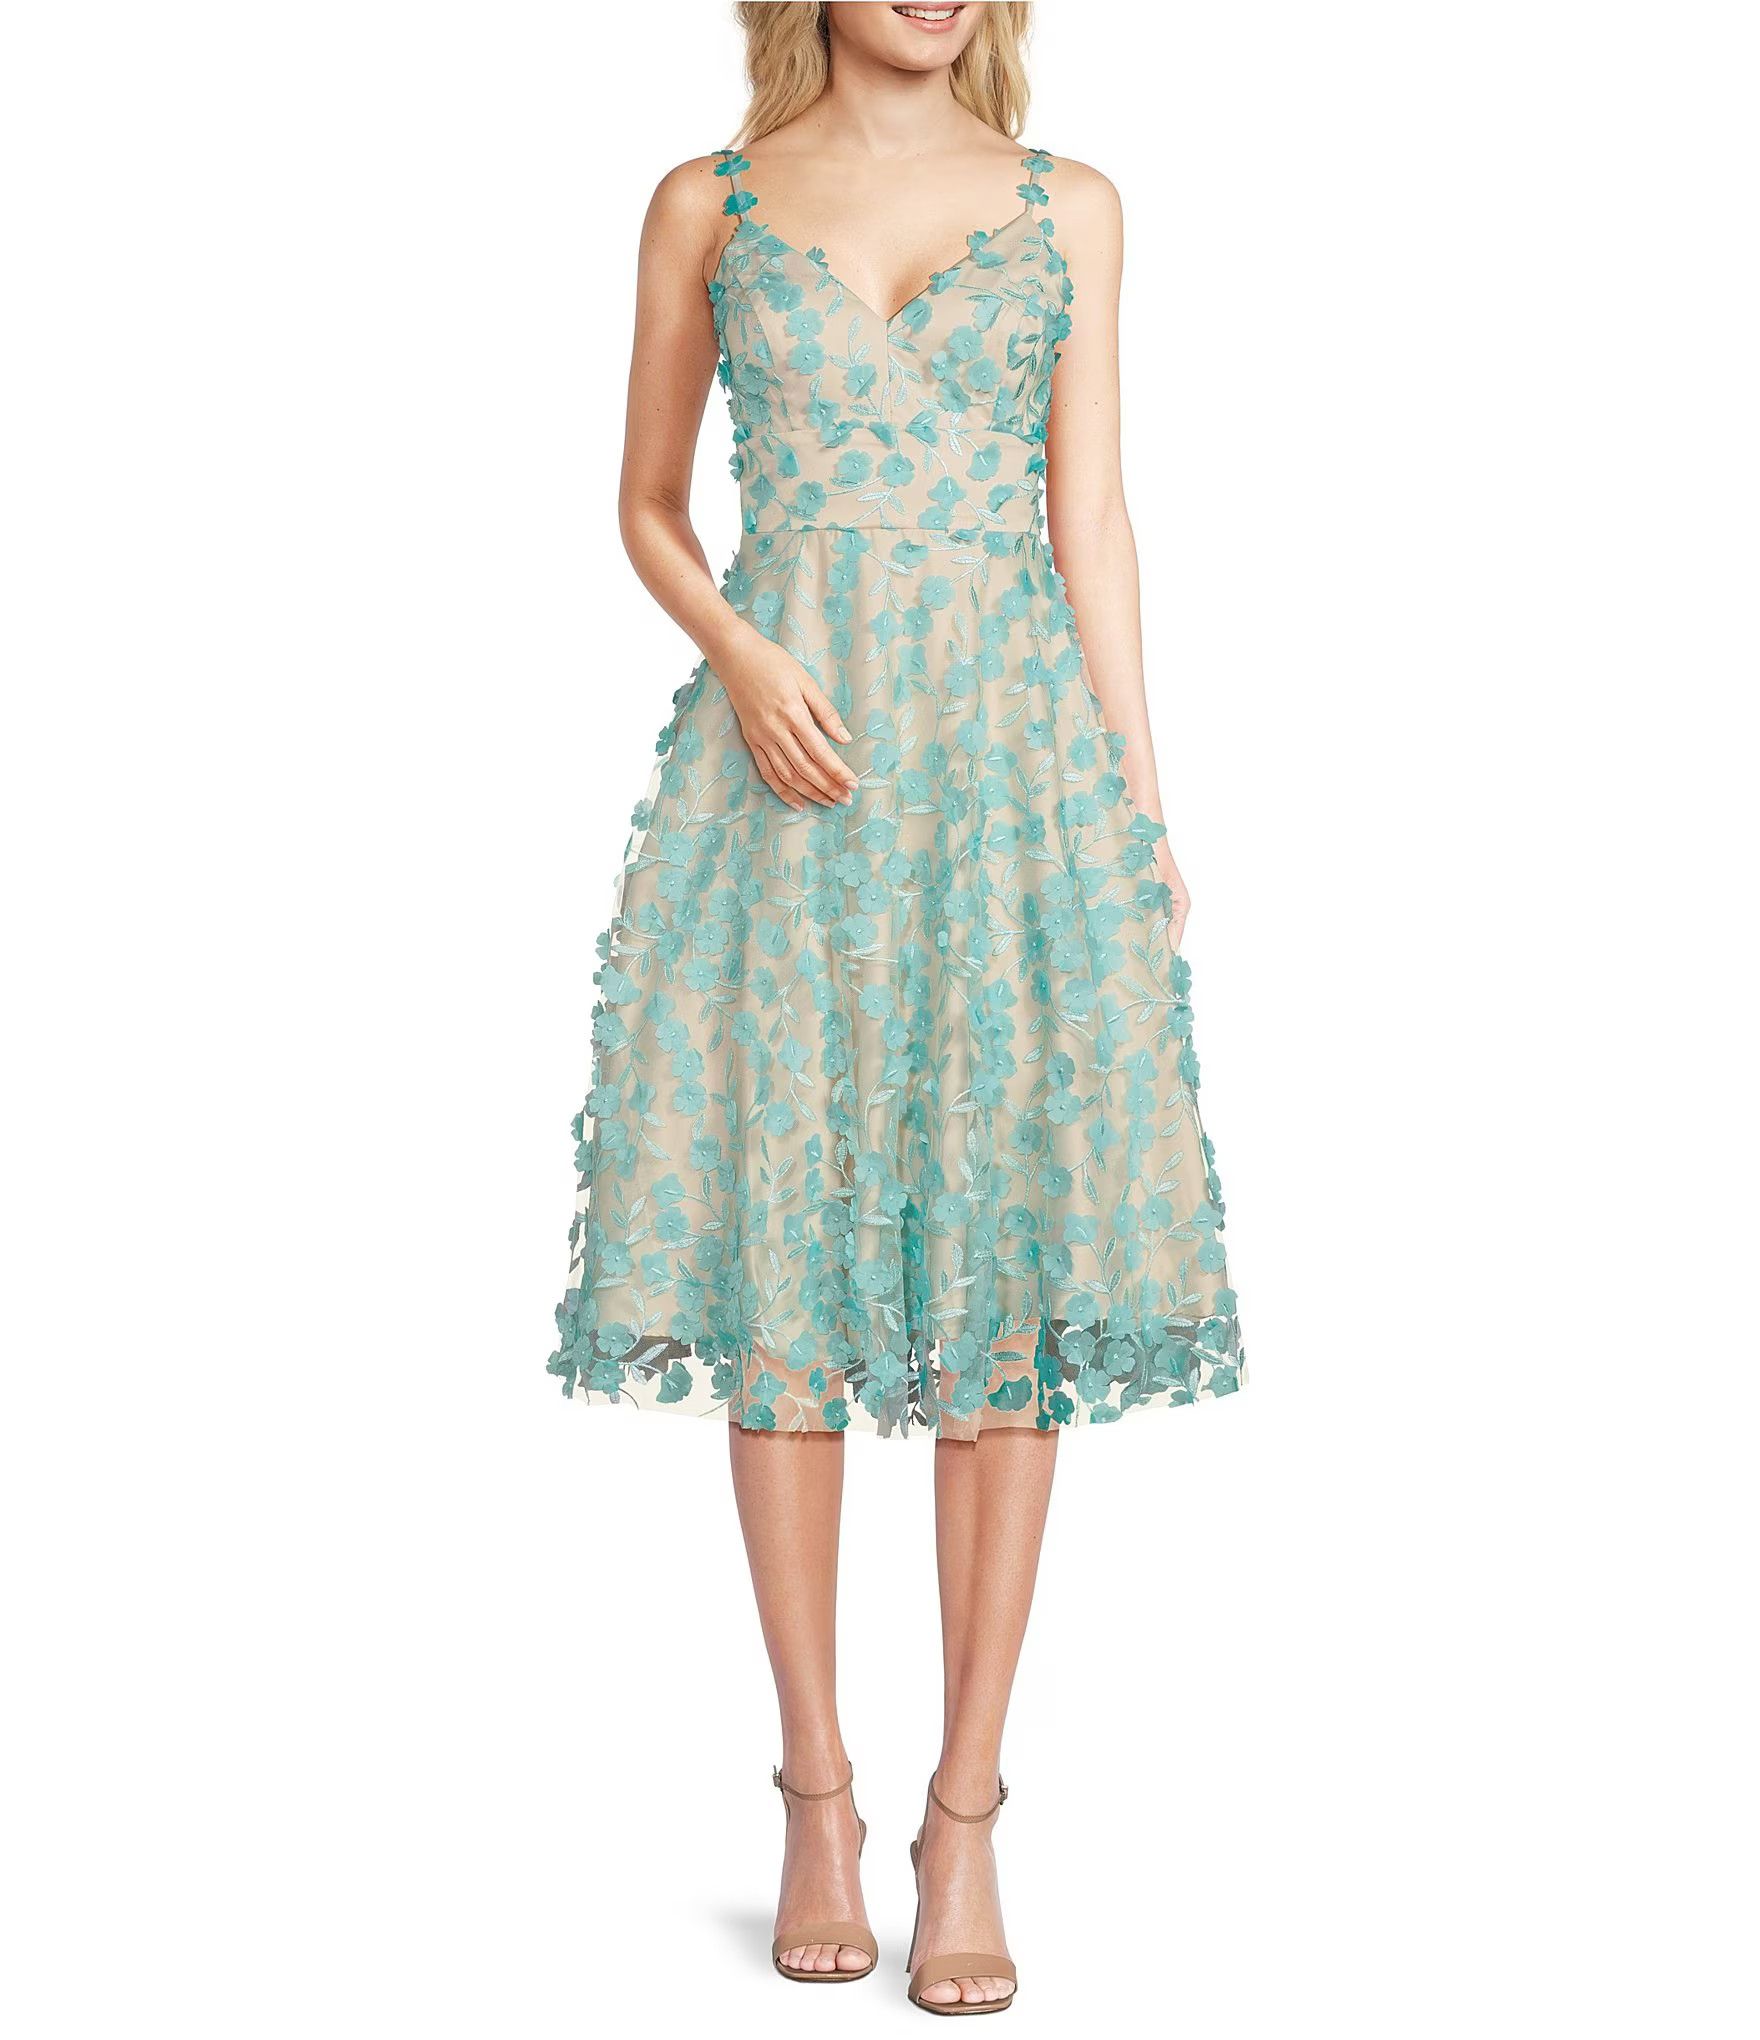 3D Floral V-Neck Sleeveless Fit and Flare Dress | Dillard's